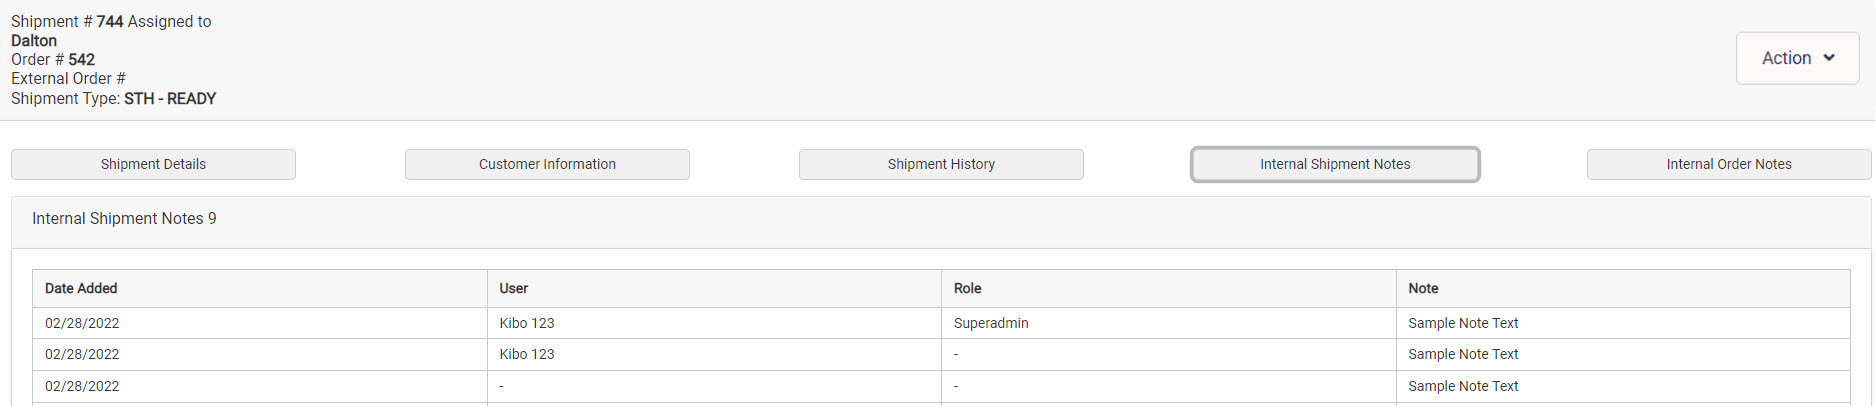 Example of a shipment details page